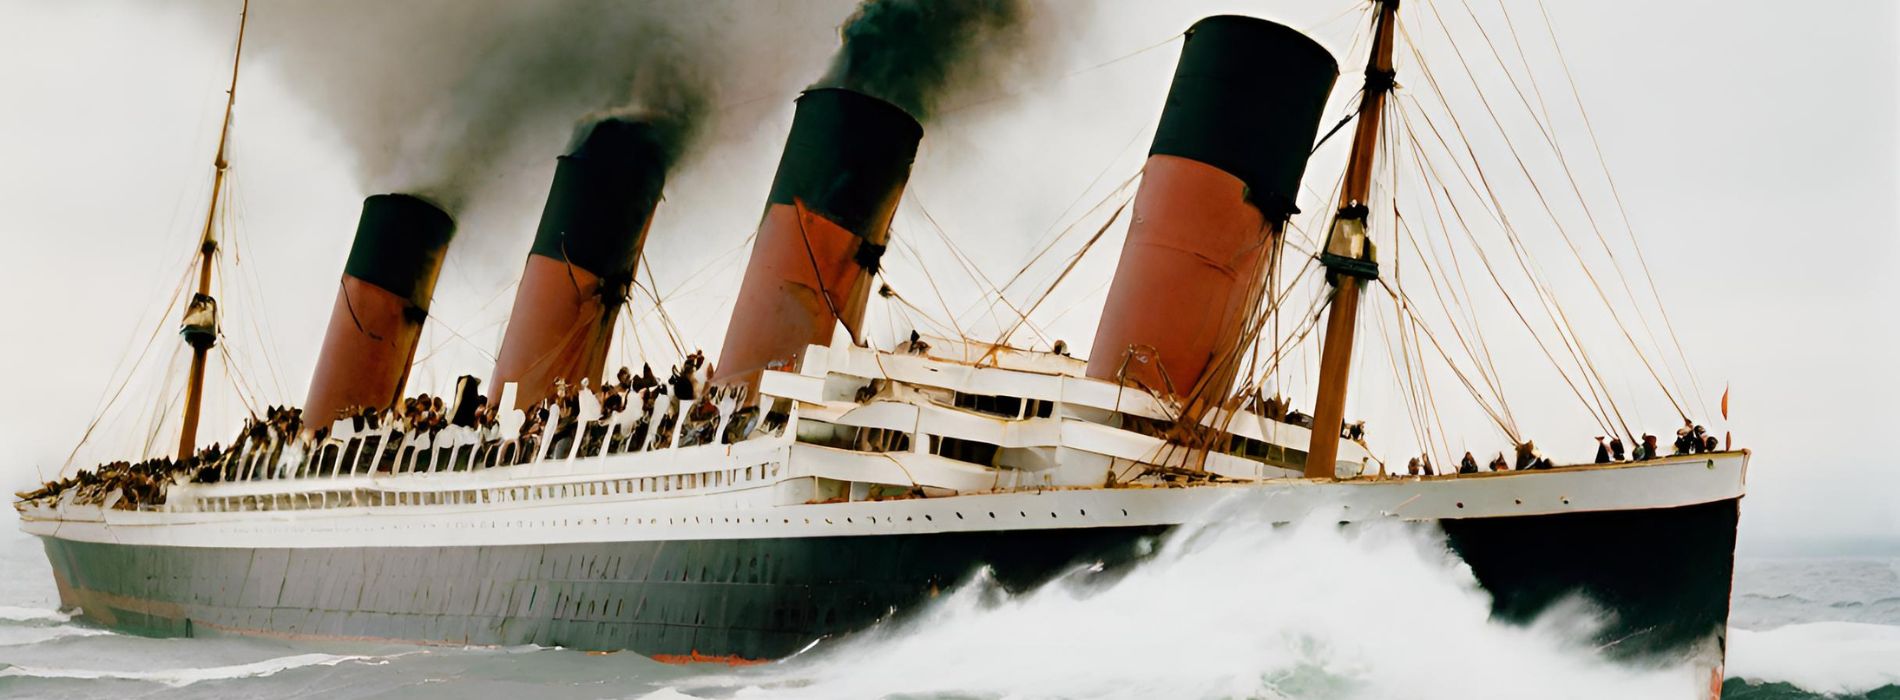 The sinking of the Lusitania and its impact on World War I. - Madeinsea©